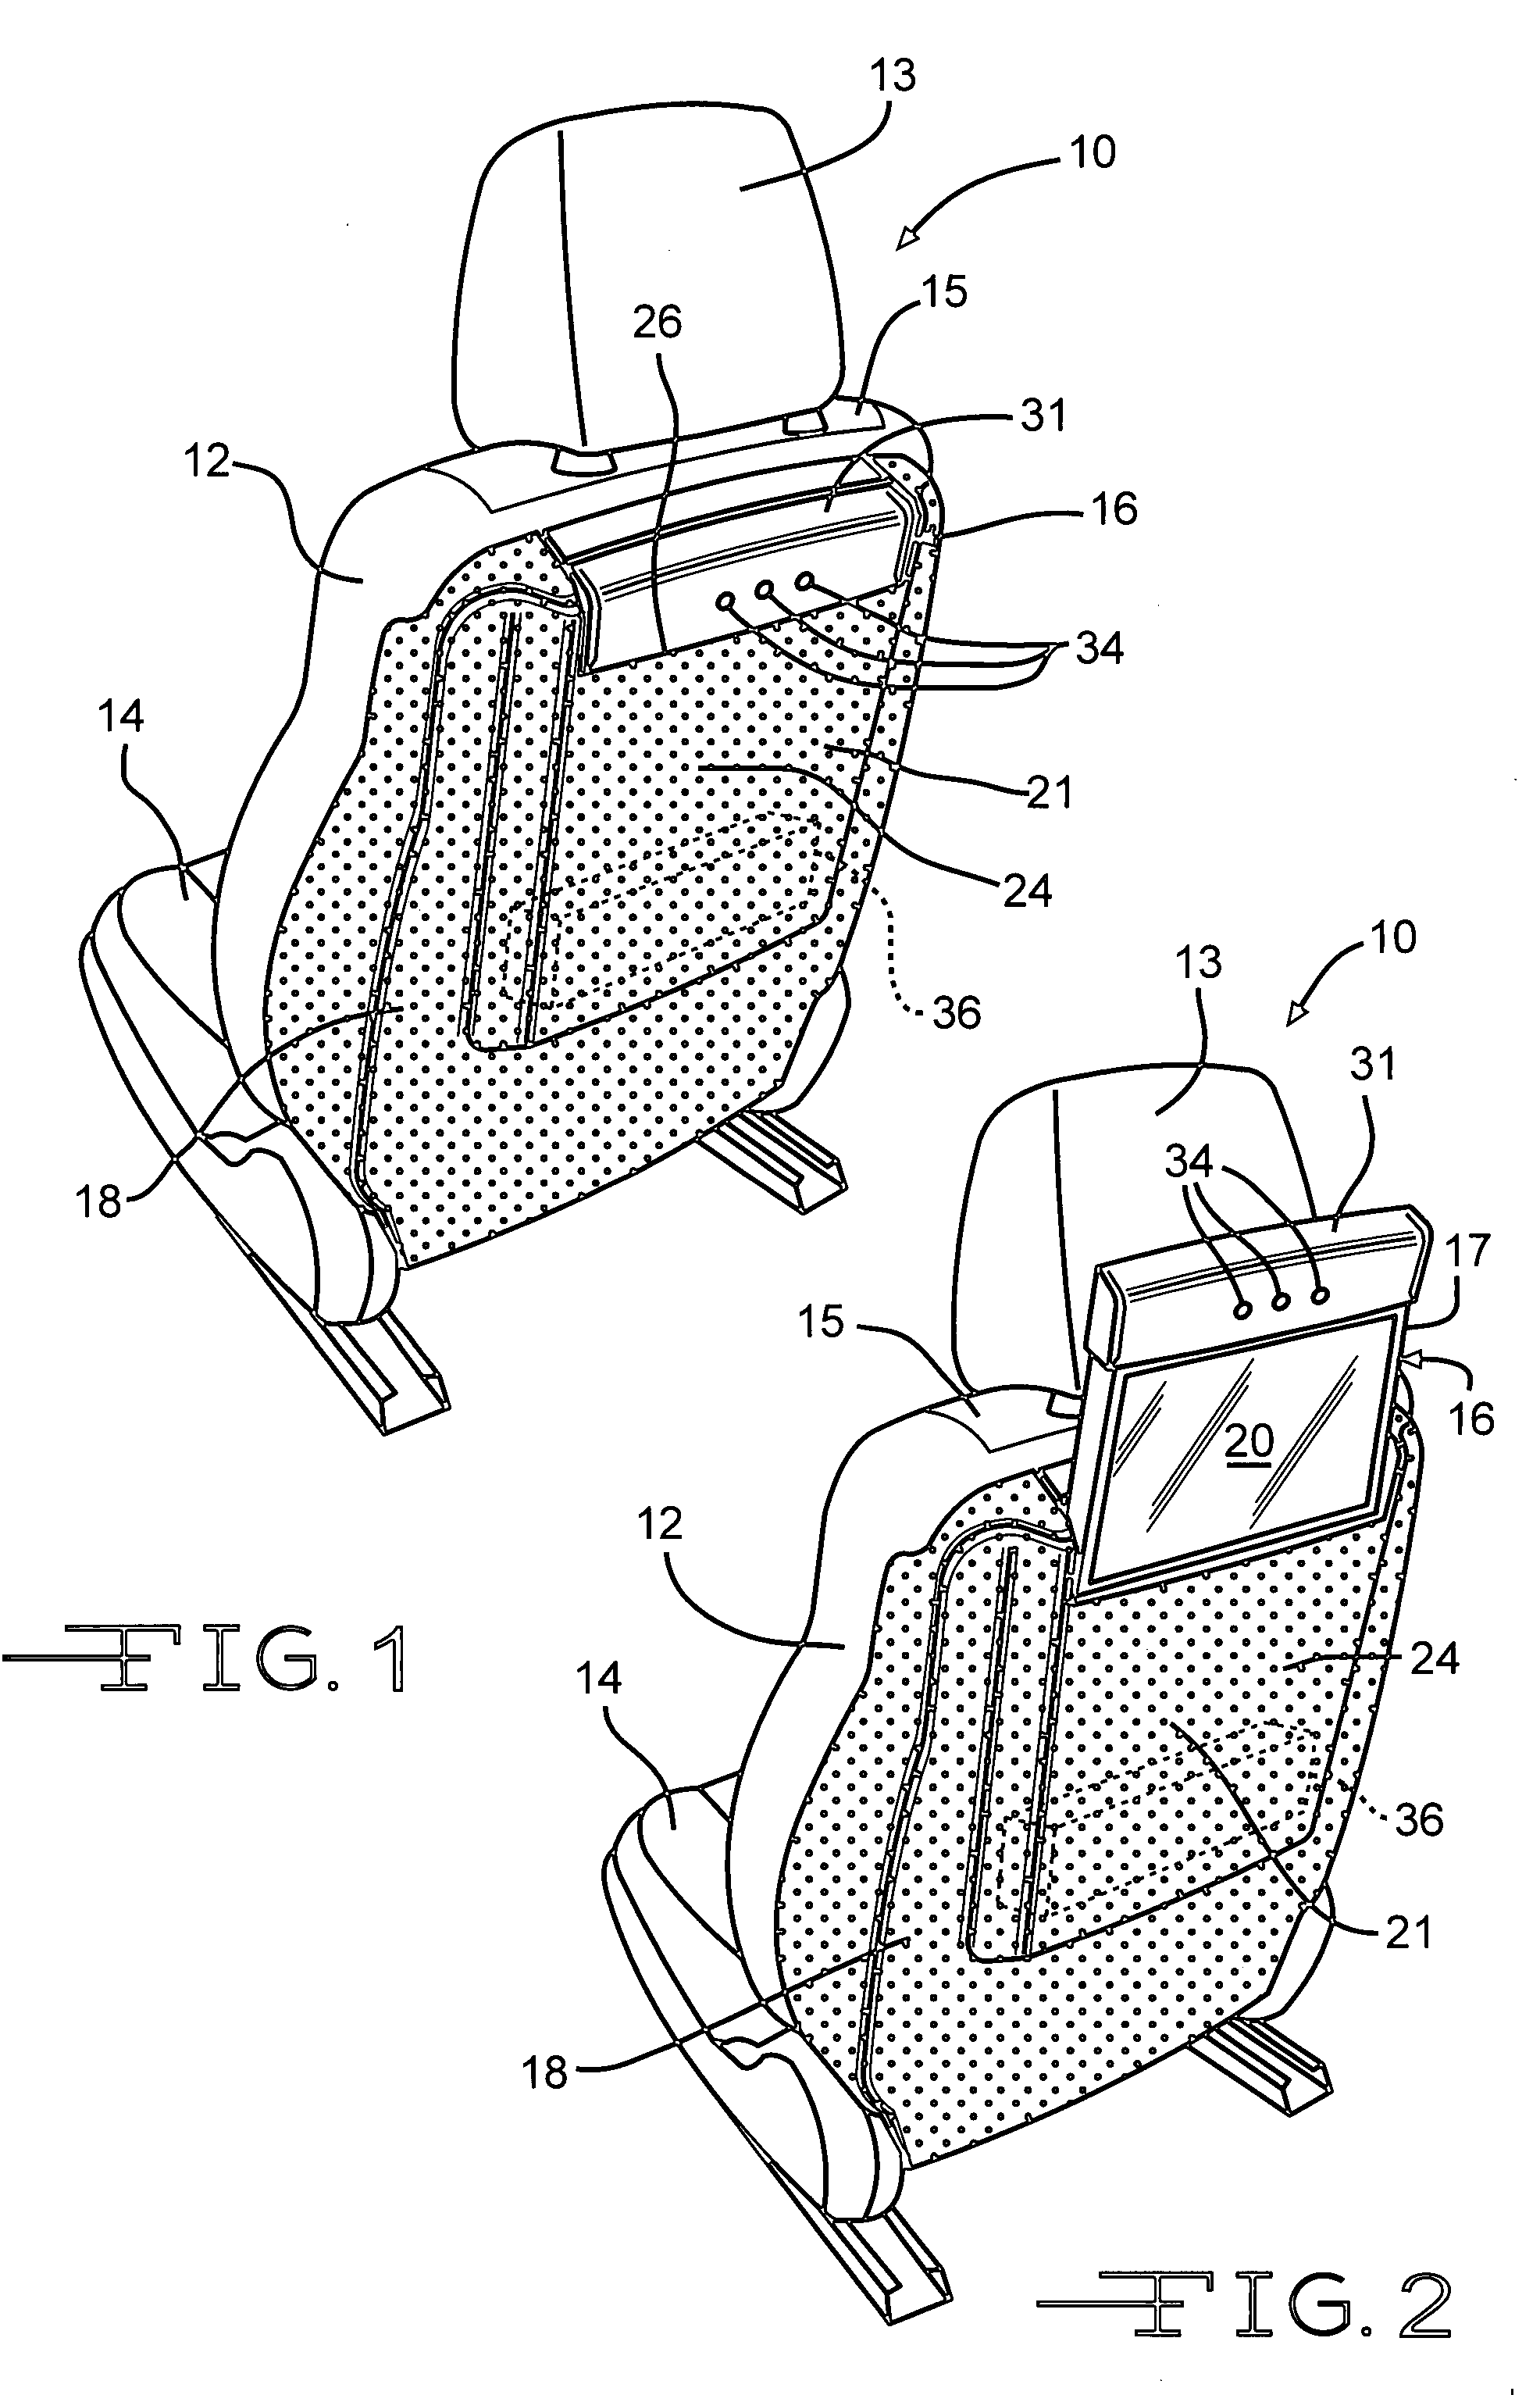 Vehicle seat having an electronic display mounted thereon